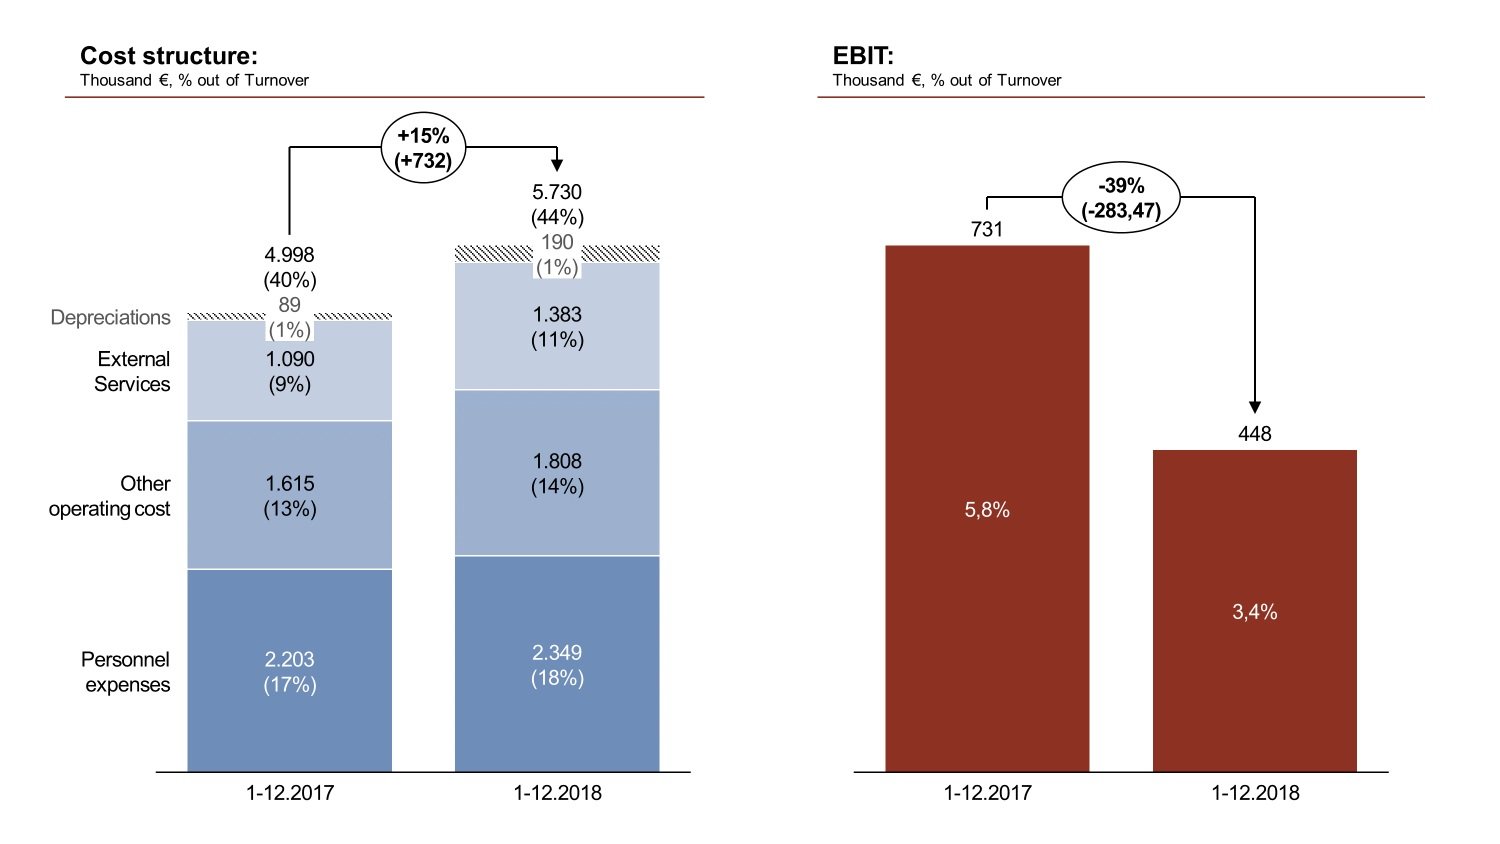 Bar chart: Cost structure and EBIT. Costs up by 15% since 2017. Deprecations stayed at 1%, External services from 9 to 11 %, Other operating costs from 13% to 14%, personnel expenses from 17% to 18%. EBIT from €731 M to €448 M (39%).